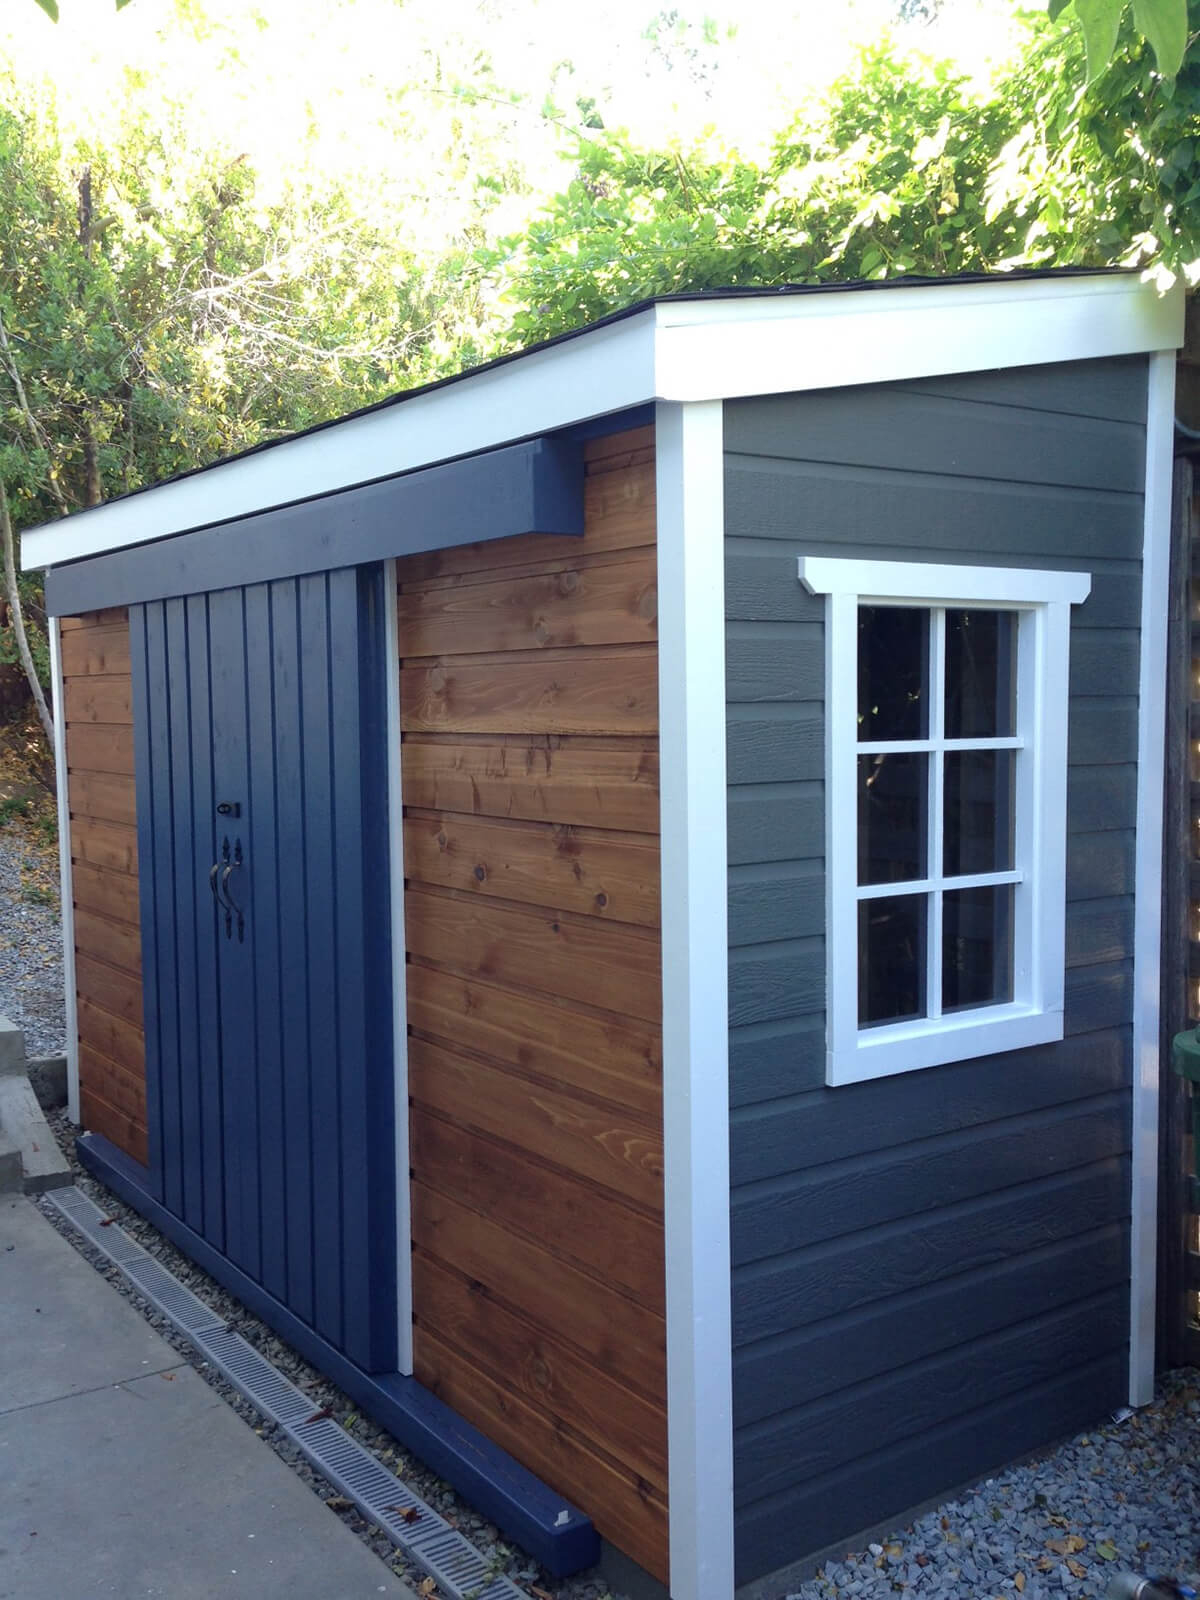 27 Best Small Storage Shed Projects Ideas And Designs For 2019 with size 1200 X 1600